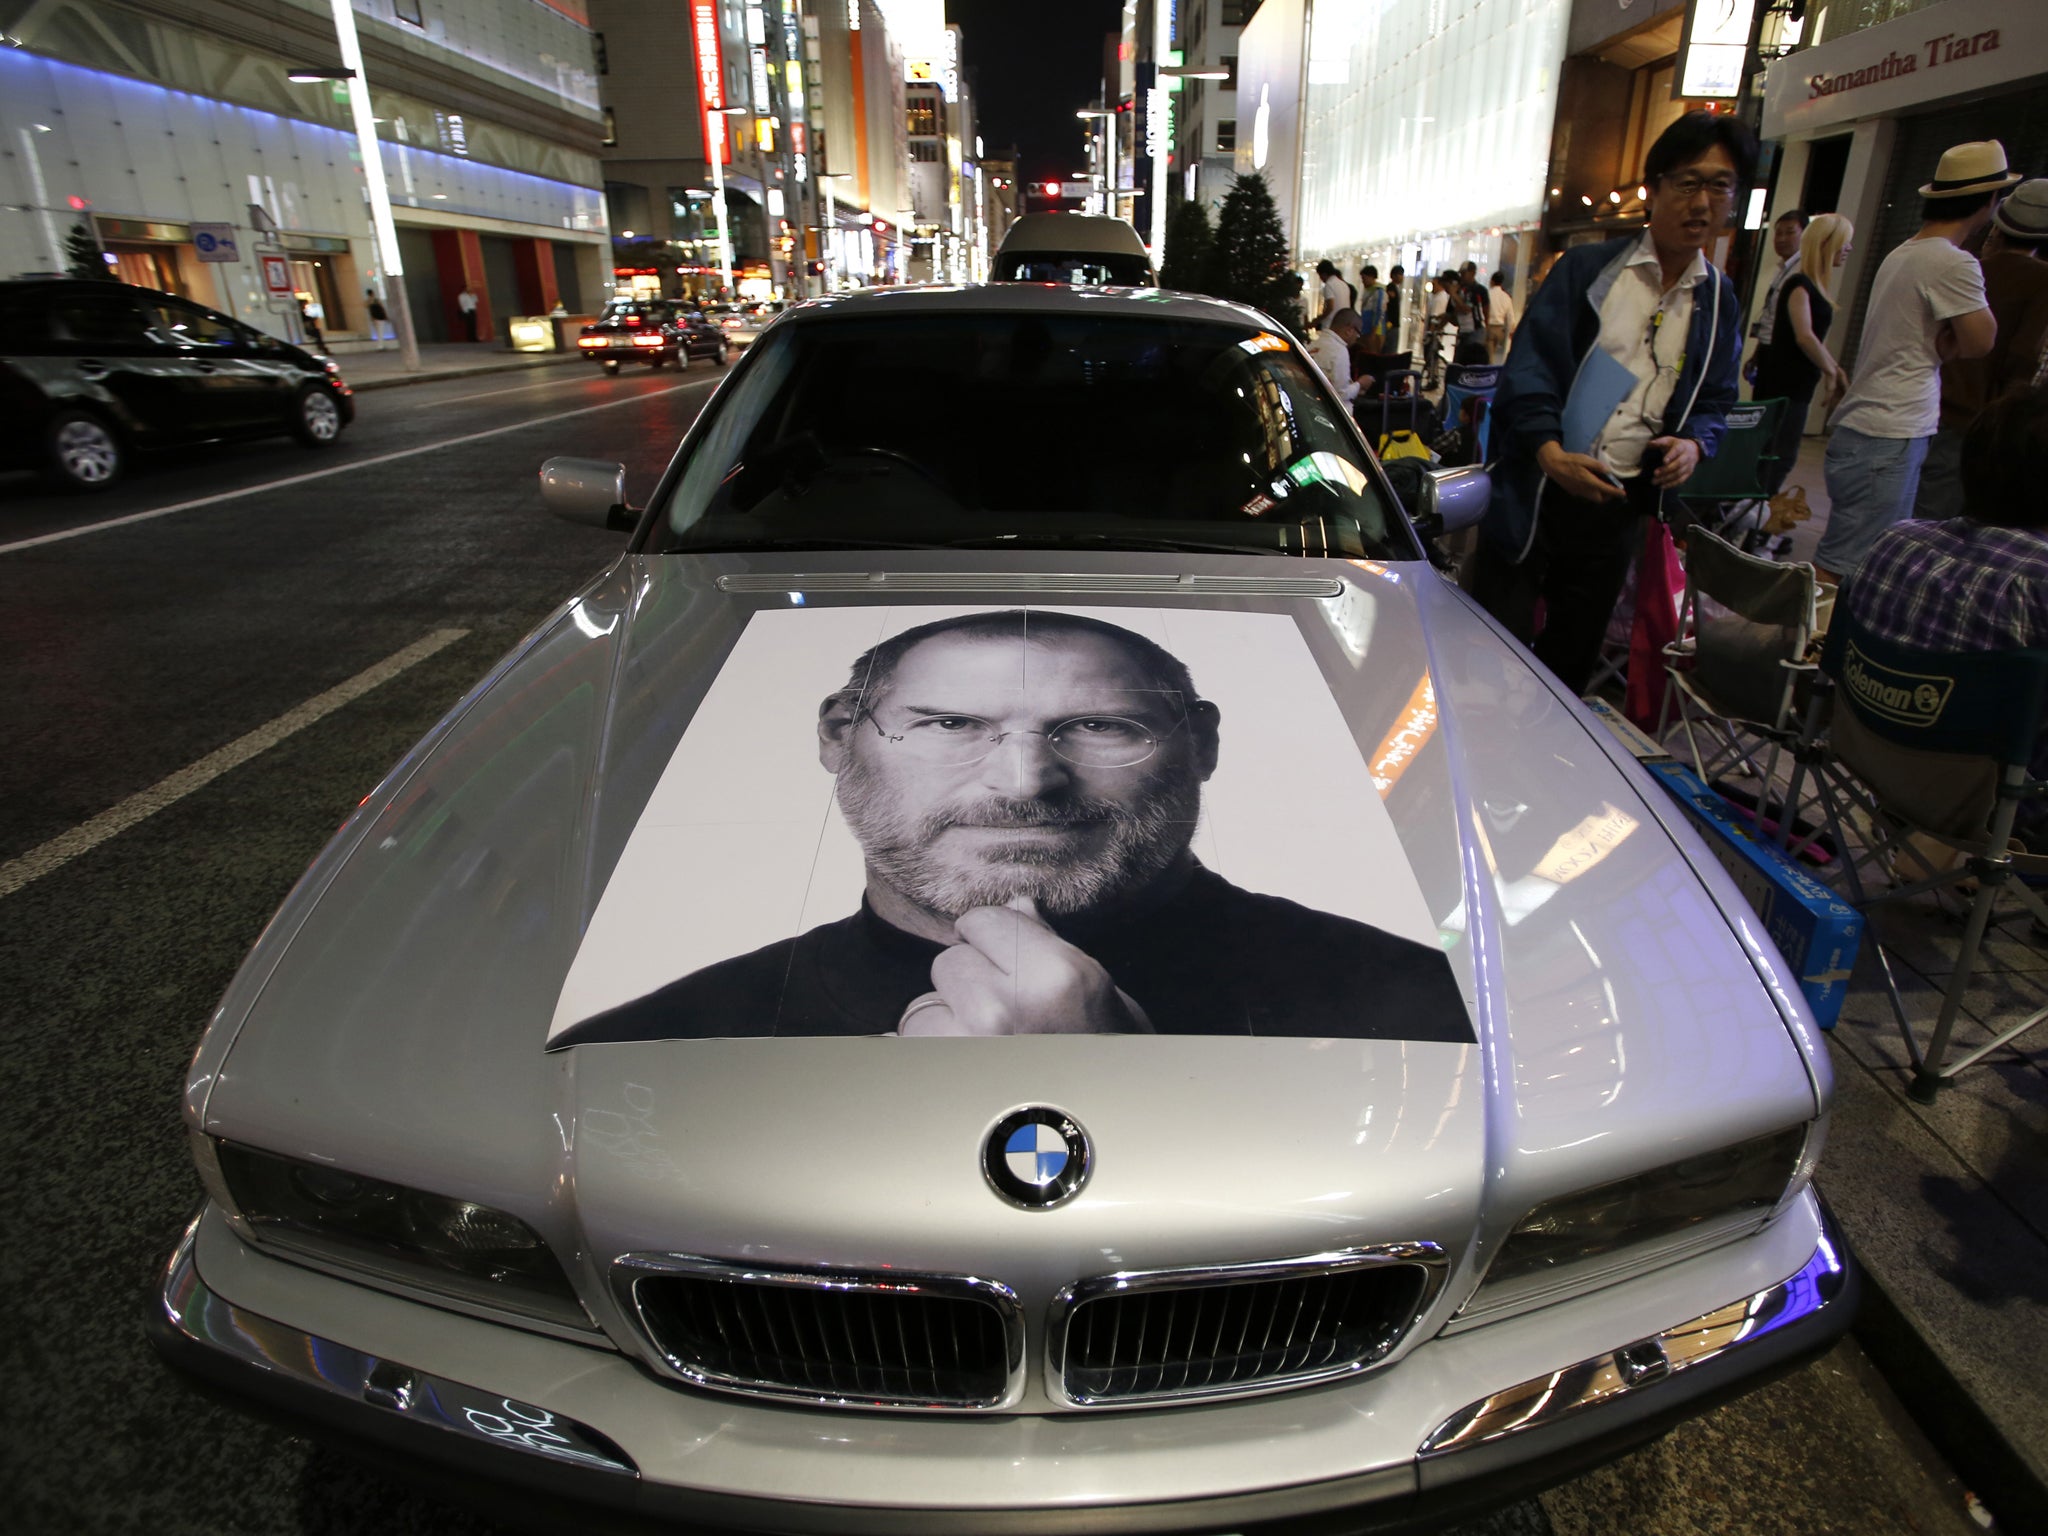 A portrait of Apple's co-founder Steve Jobs is seen on a BMW car as people wait for the release of Apple's new iPhone 5S and 5C, near the Apple Store at Tokyo's Ginza shopping district September 19, 2013, a day before the phones go on sale